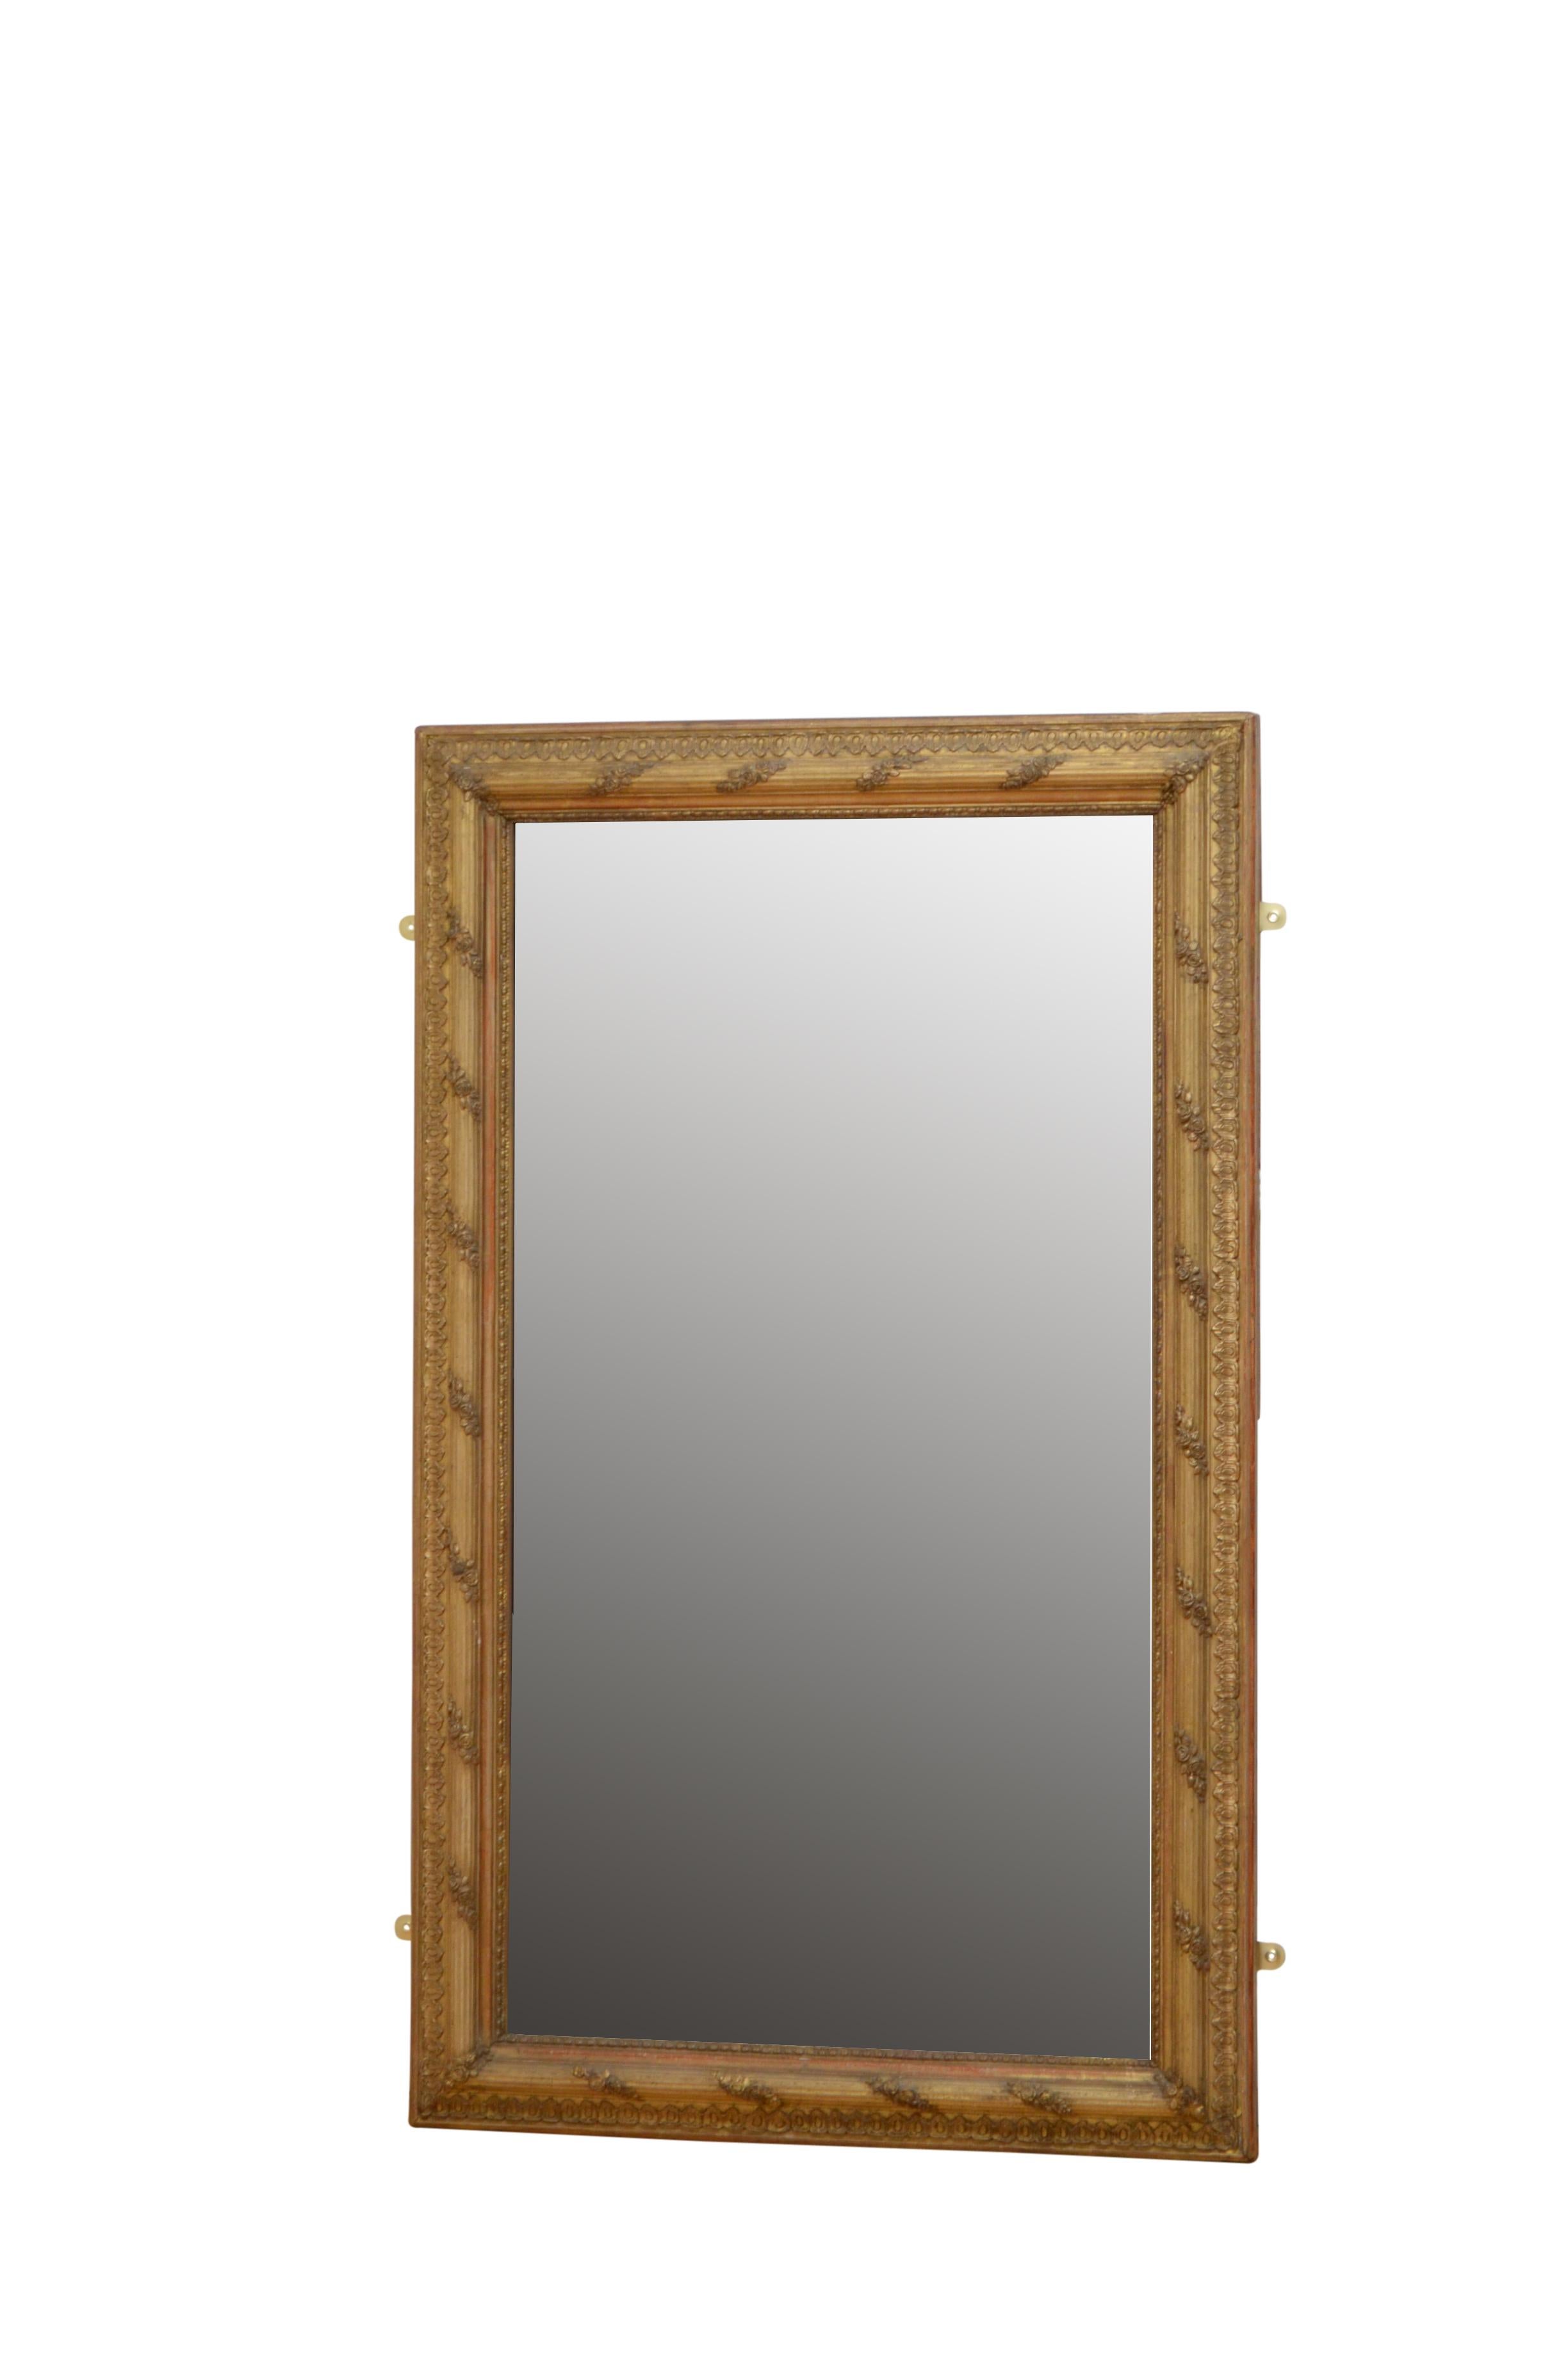 Superb gilded wall mirror or pier mirror, having original mercury glass in moulded and reeded frame with floral decoration throughout. This antique mirror can be positioned vertically or horizontally, it retains its original glass, gilt and